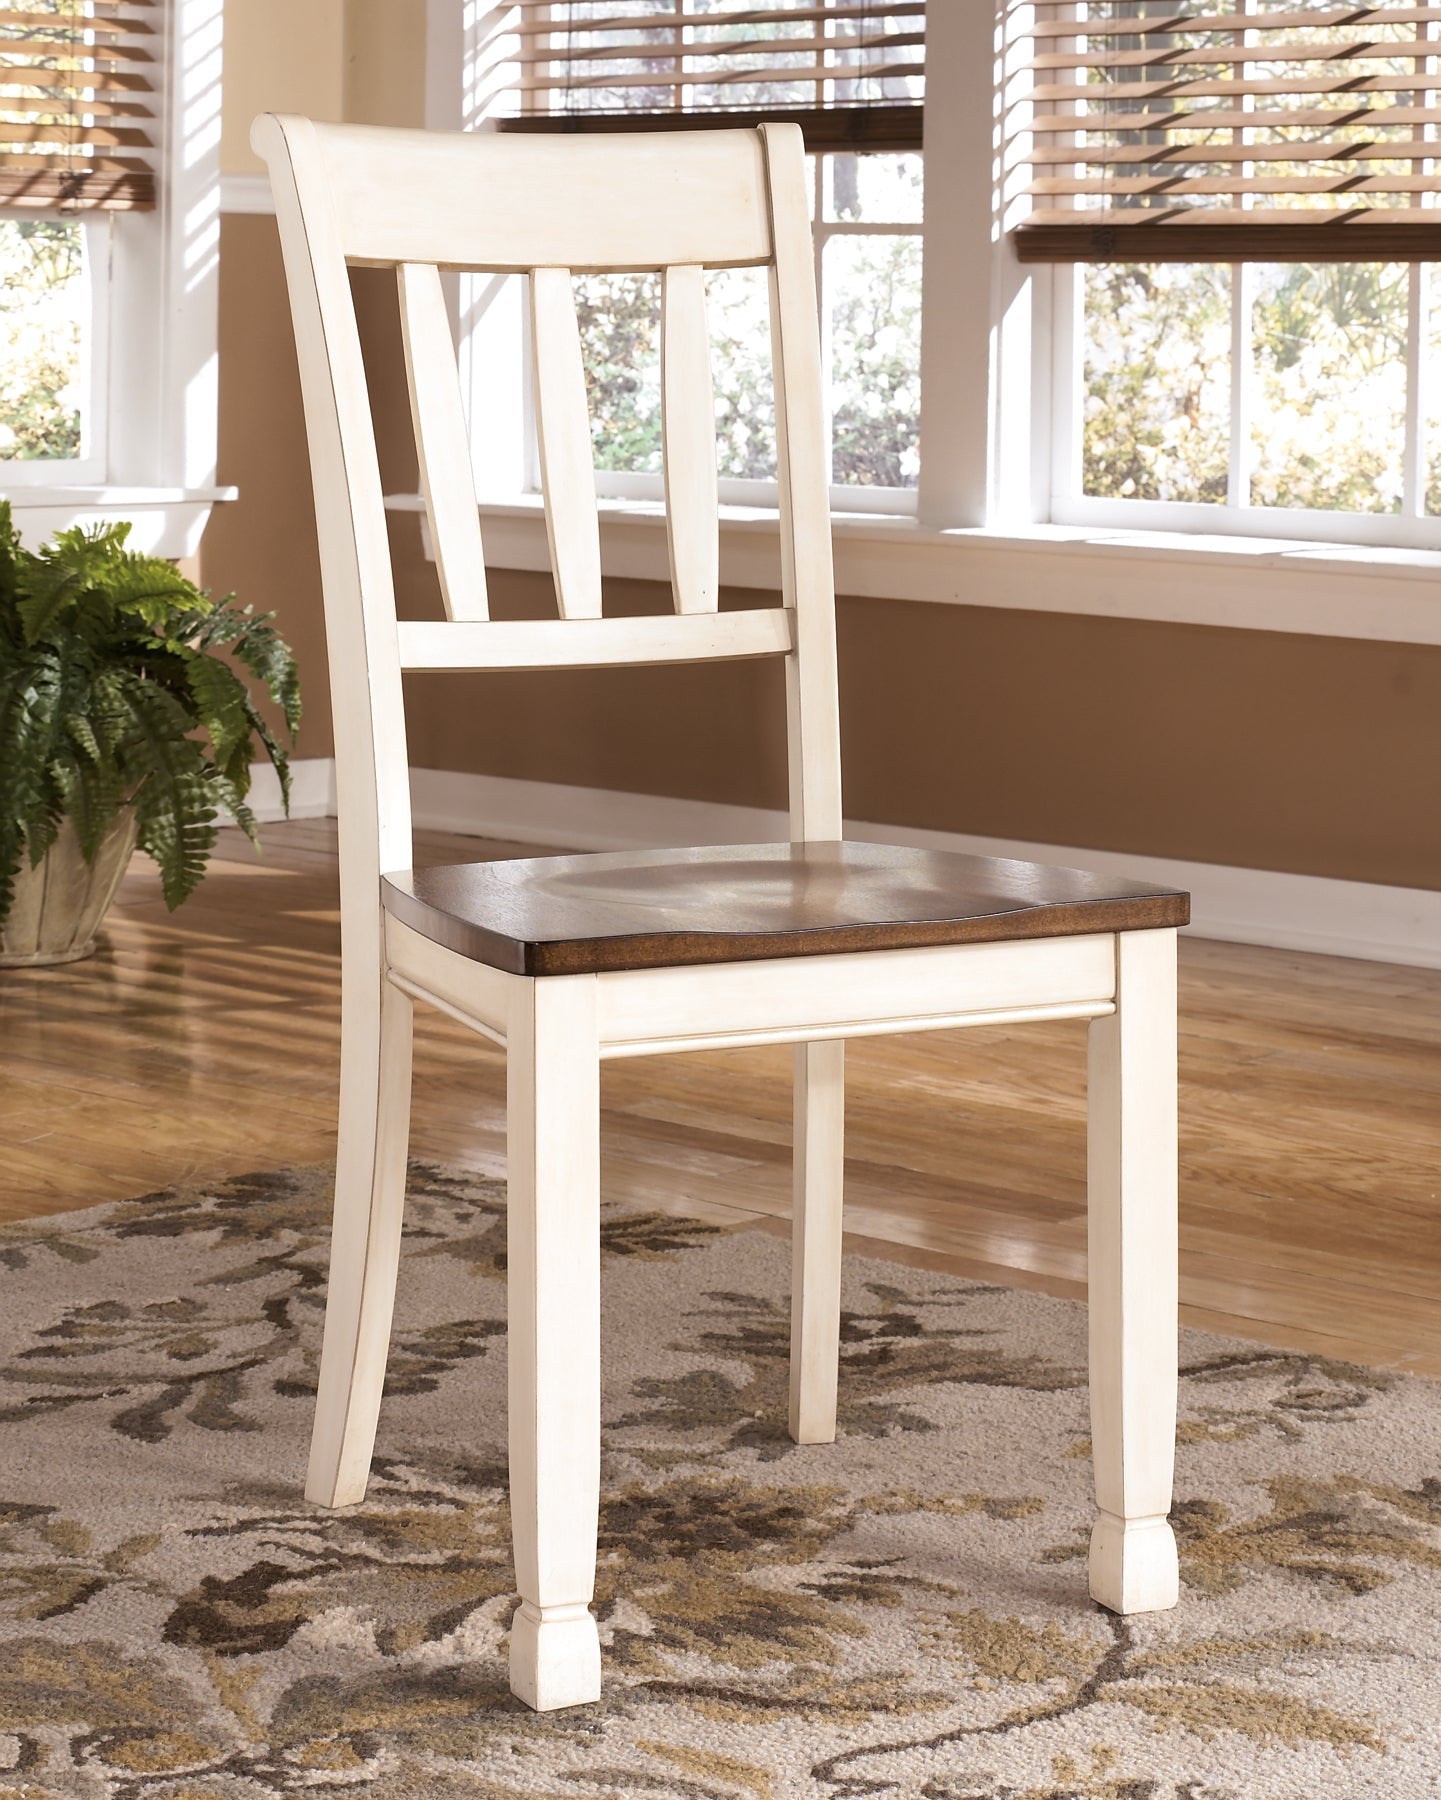 Whitesburg Dining Table and 6 Chairs at Cloud 9 Mattress & Furniture furniture, home furnishing, home decor